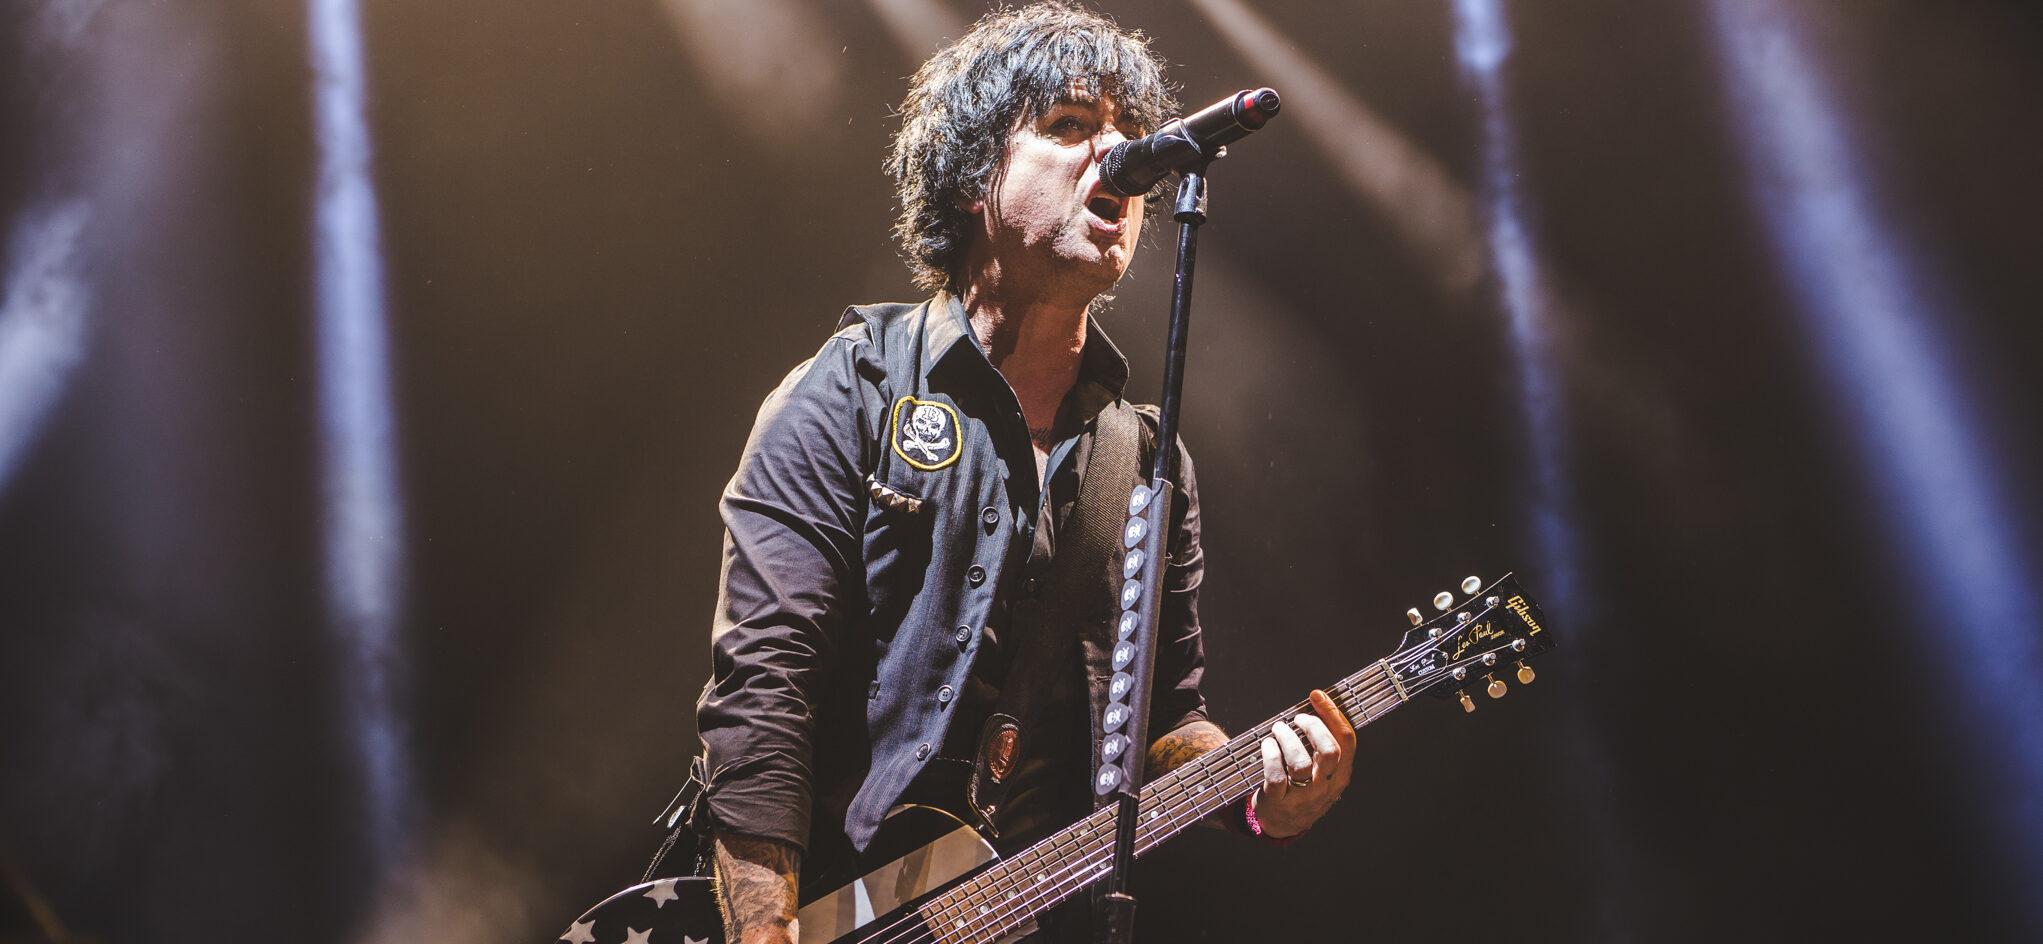 'Green Day' Star Billie Joe Armstrong Cancels NYE Show Due To COVID-19